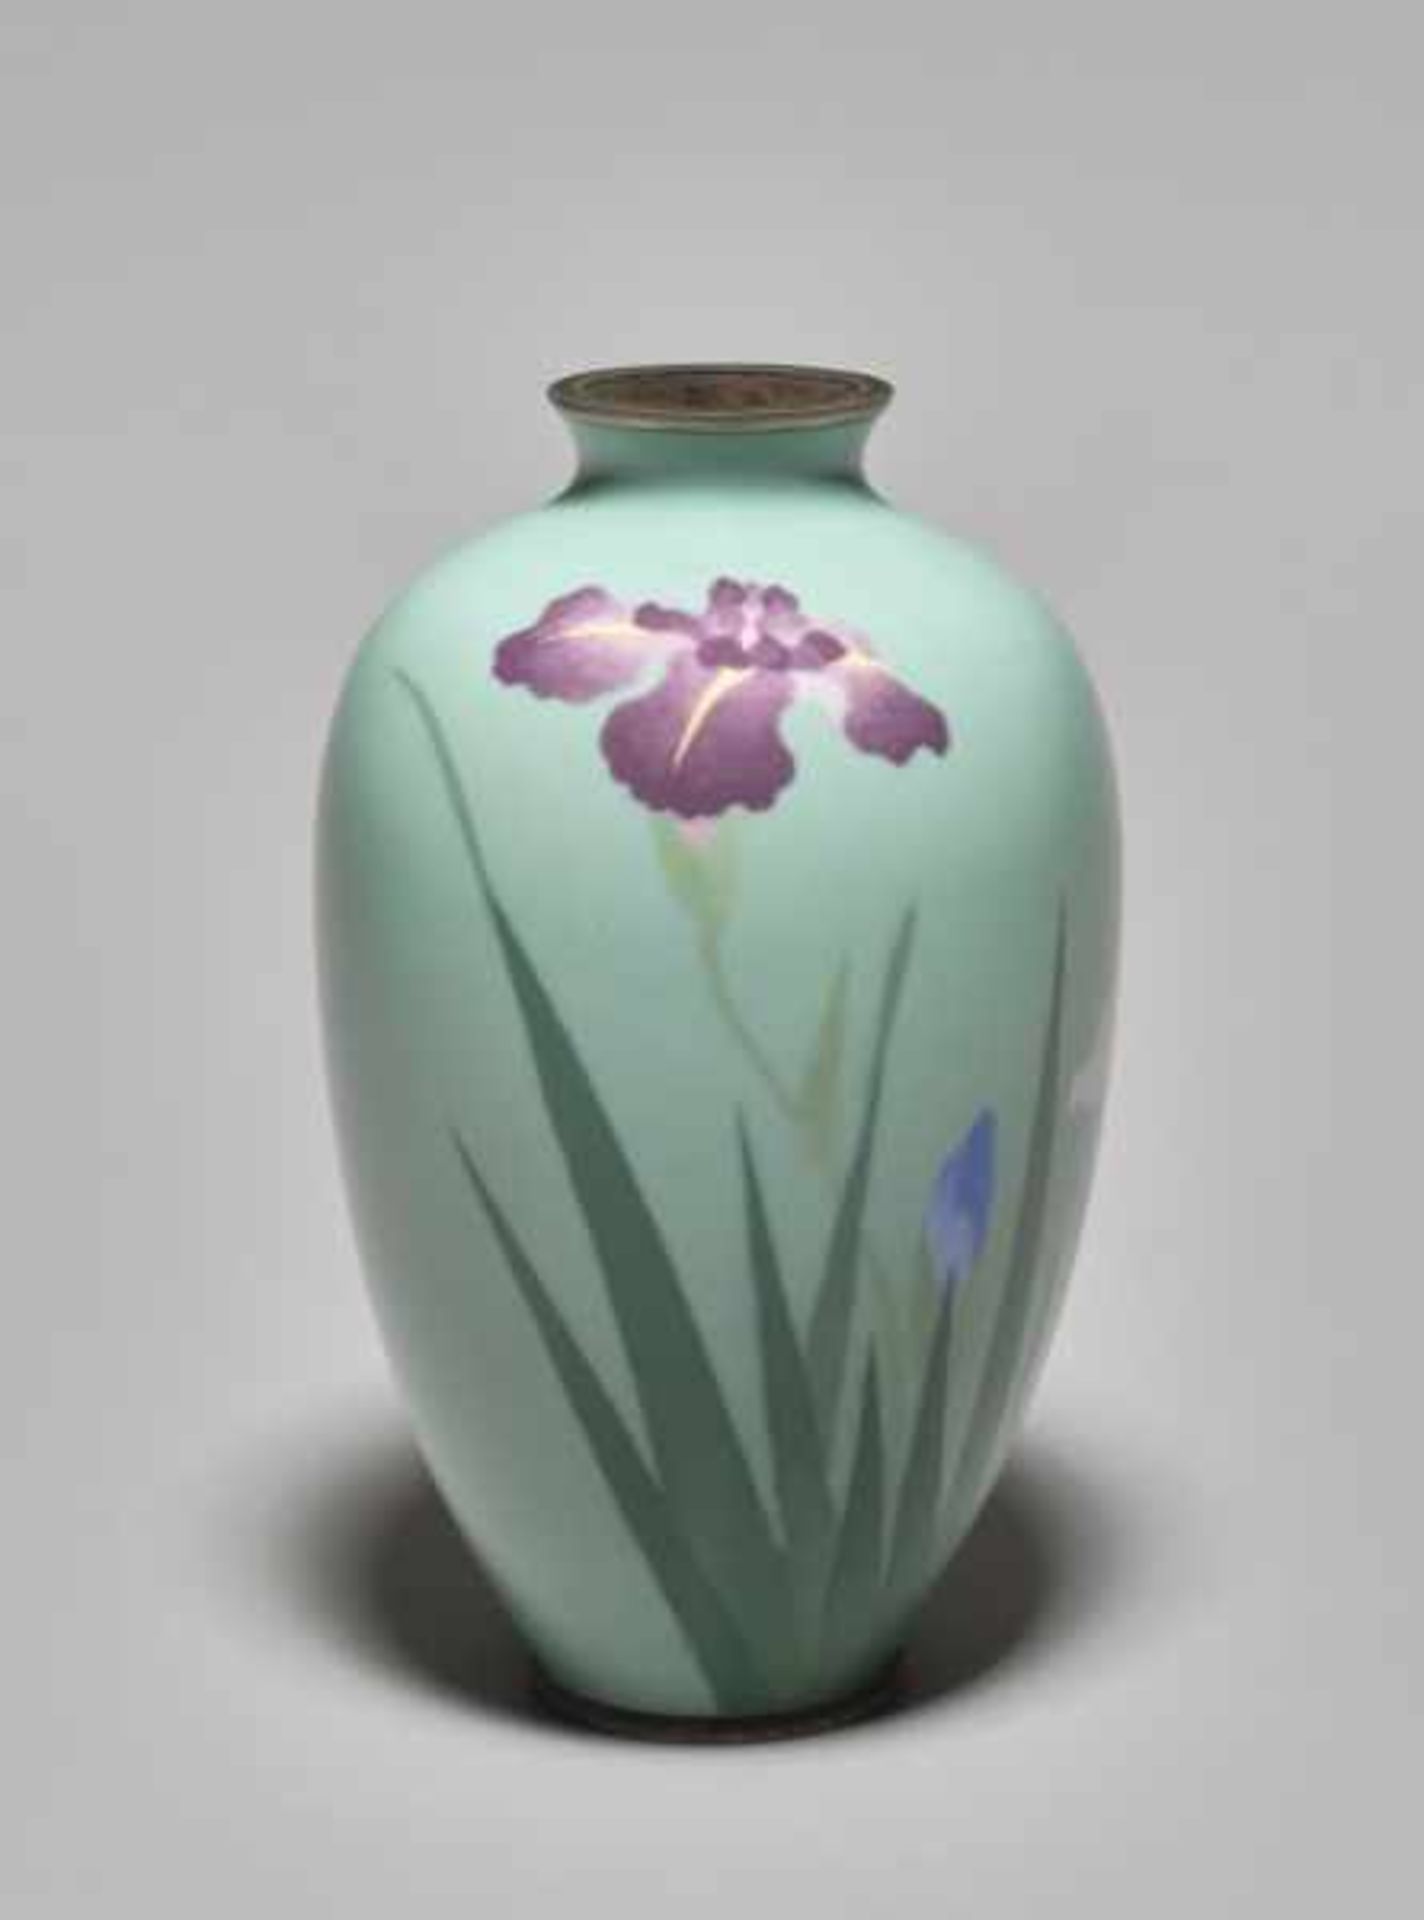 A CLOISONNÉ VASE WITH IRIS BLOSSOMS IN THE STYLE OF NAMIKAWA SOSUKE Colored enamel cloisonné on